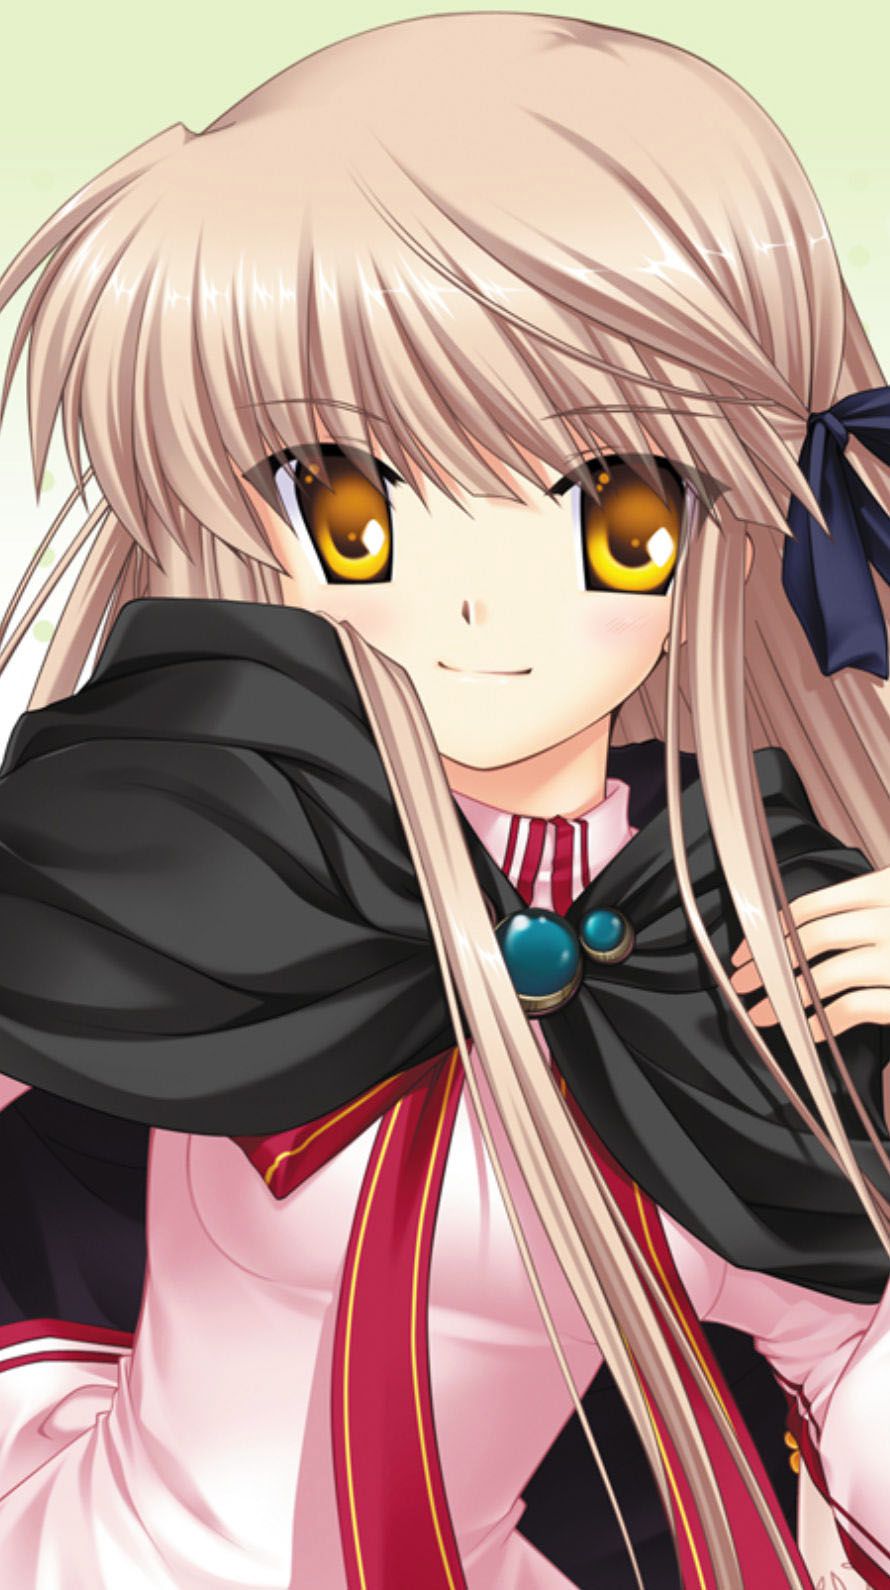 Rewrite リライト Iphone壁紙画像 Androidスマホ壁紙 14 千里朱音 Iphone6 Iphone5s アニメ壁紙ネット Pc Android Iphone壁紙 画像